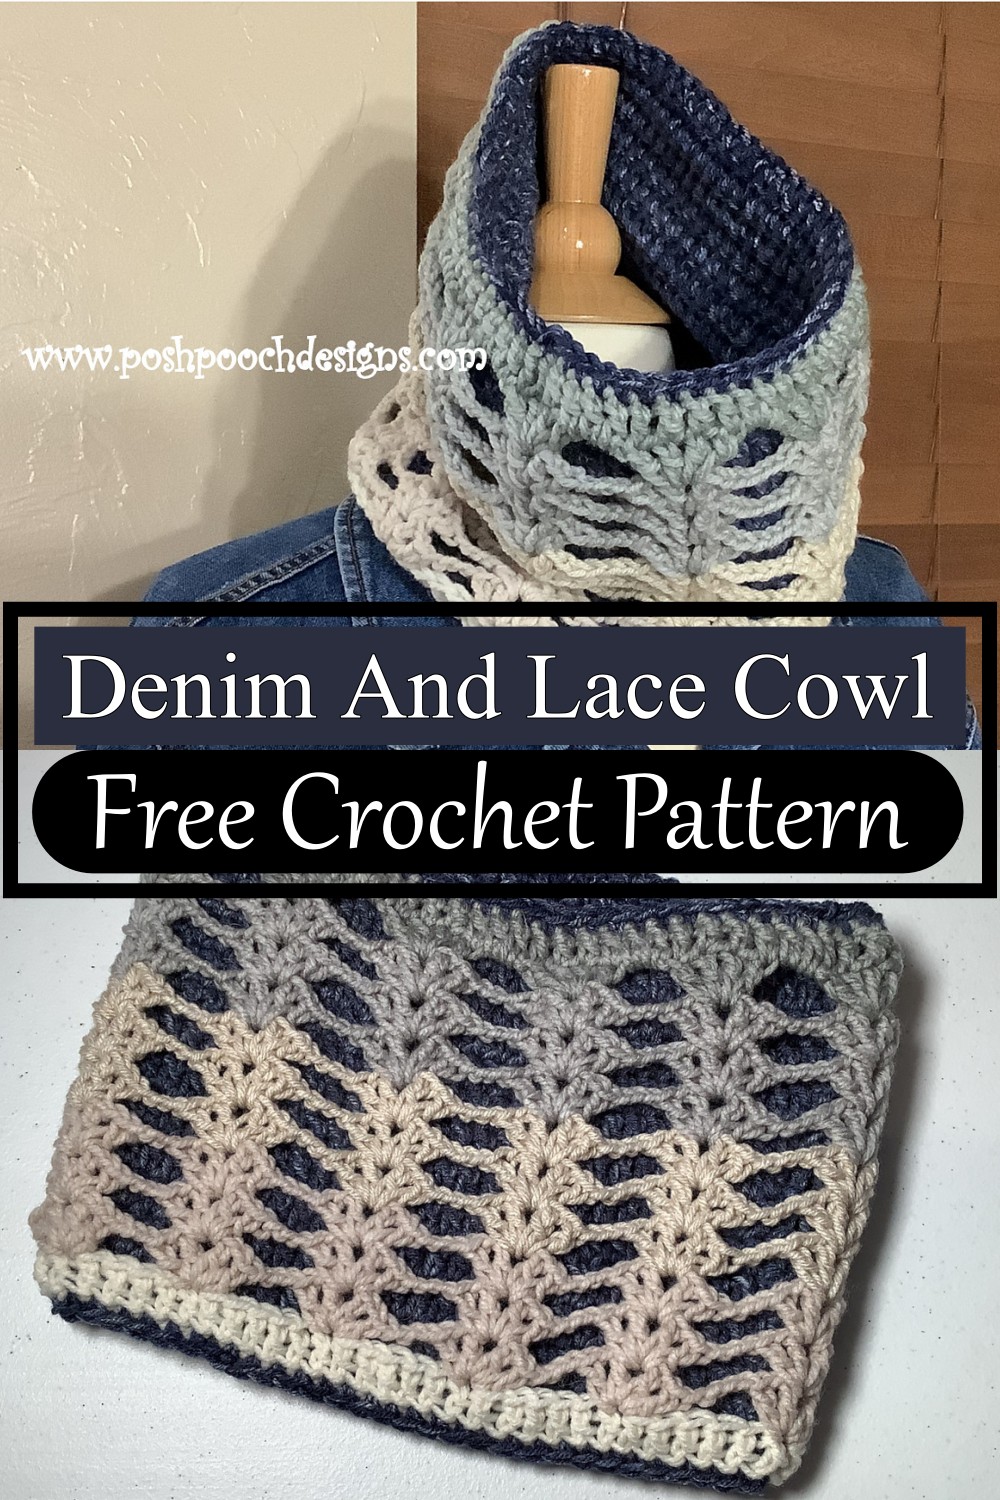 Denim And Lace Cowl